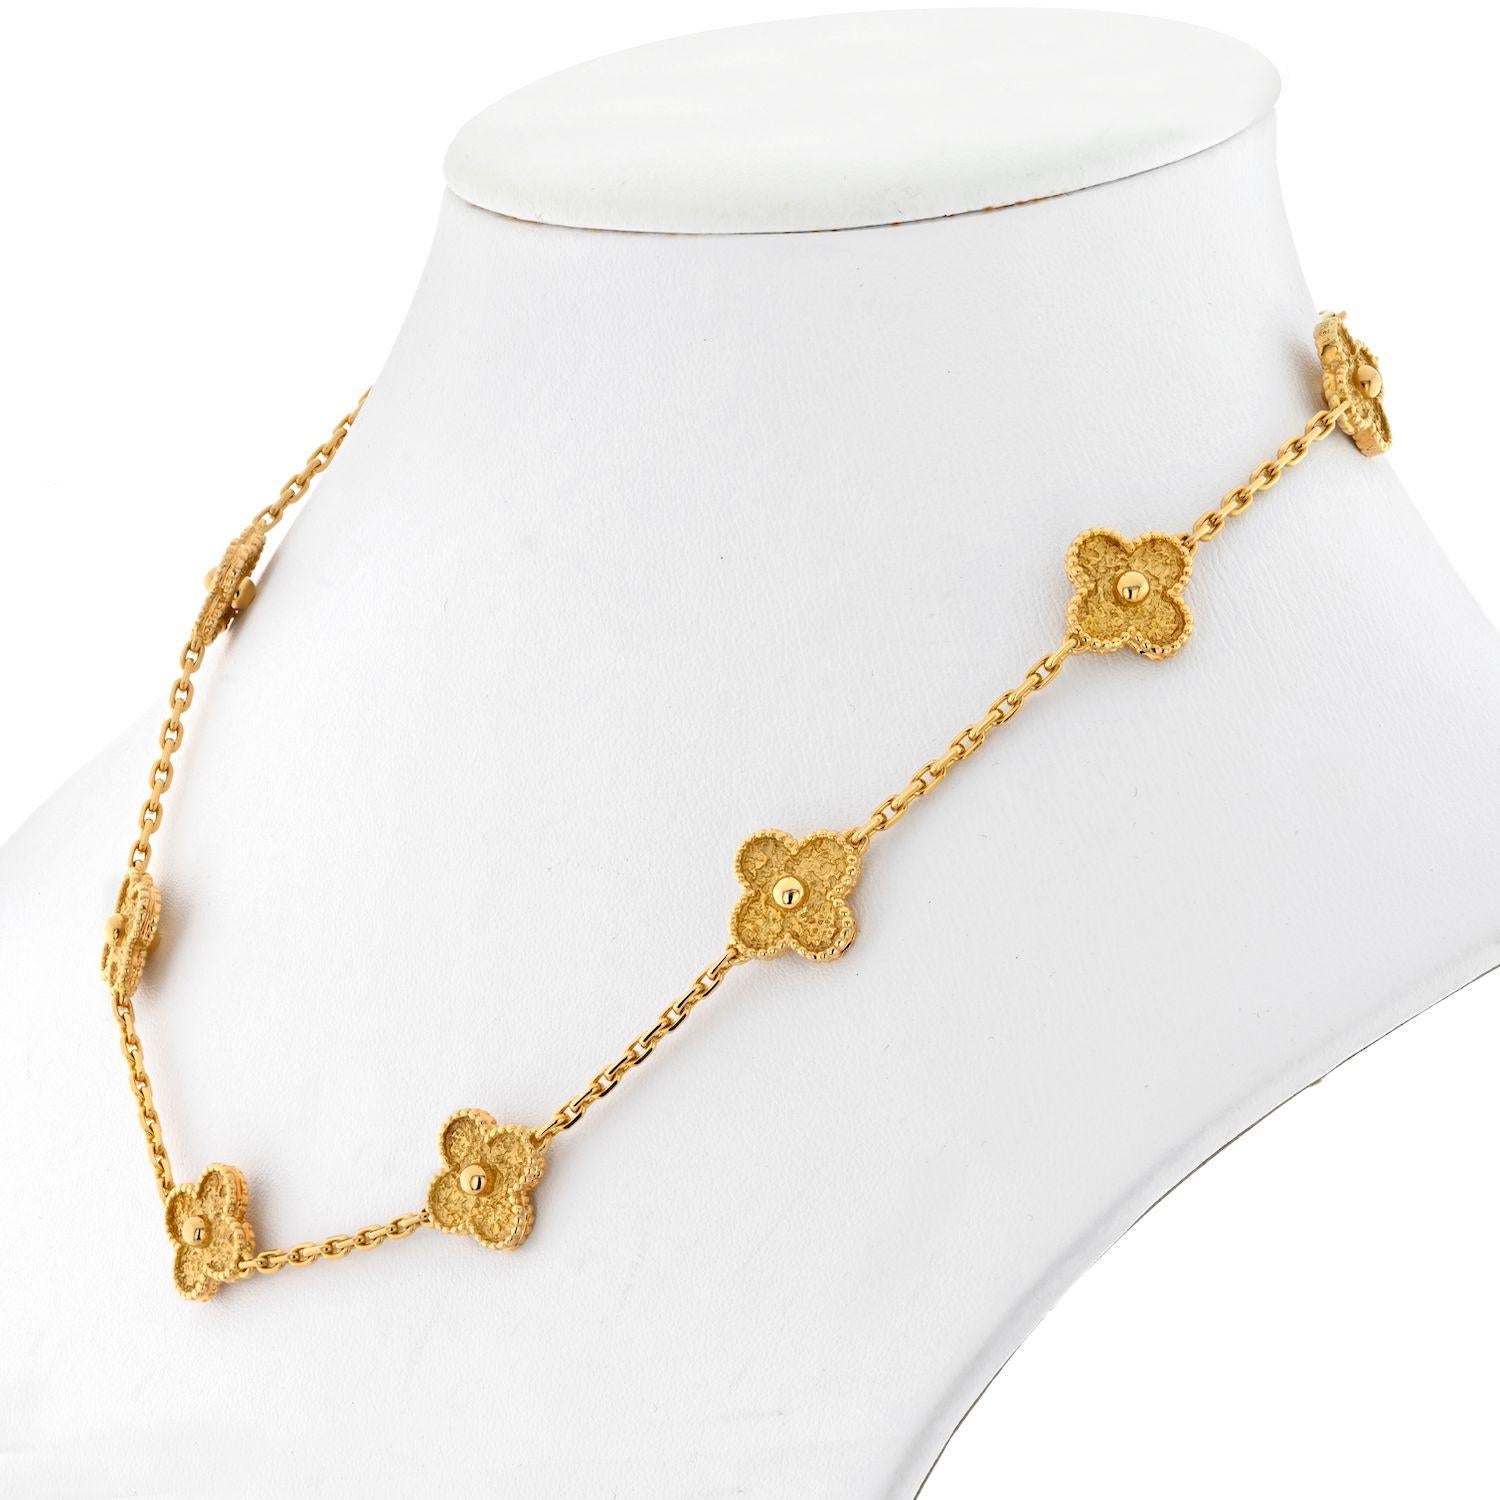 Van Cleef & Arpels 18K Yellow Gold 10 Motif Alhambra Necklace. Currently out of stock in Van Cleef & Arpels store this is a highly desirable Vintage 10 Motif Alhambra necklace. 
16.5 inches long. 
Each motif is about 14mm wide.